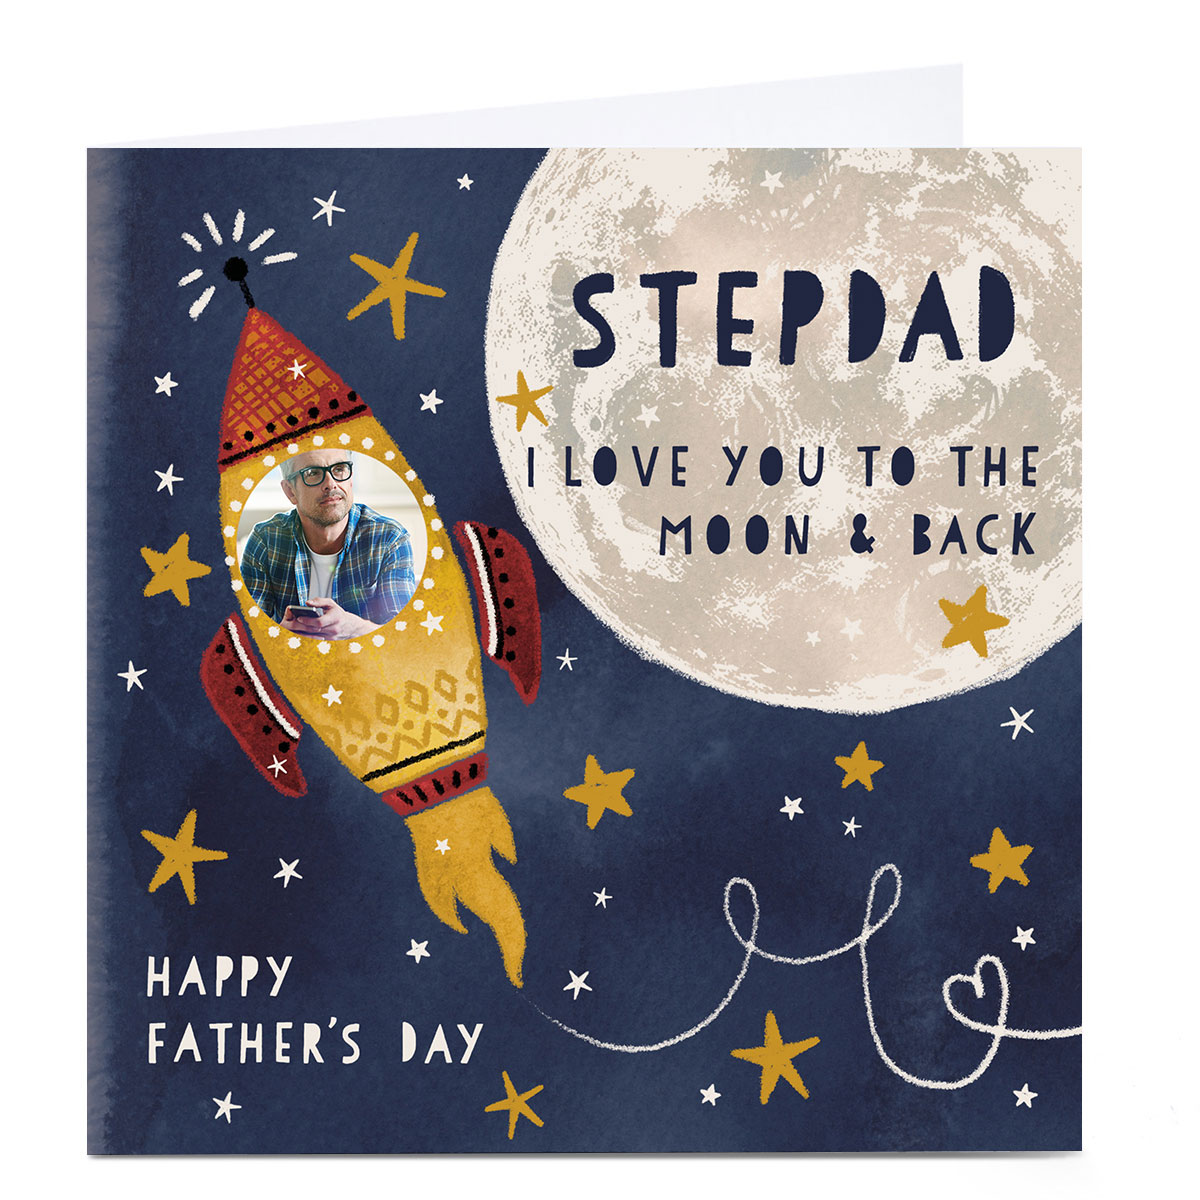 Photo Kerry Spurling Father's Day Card - Stepdad Moon & Back